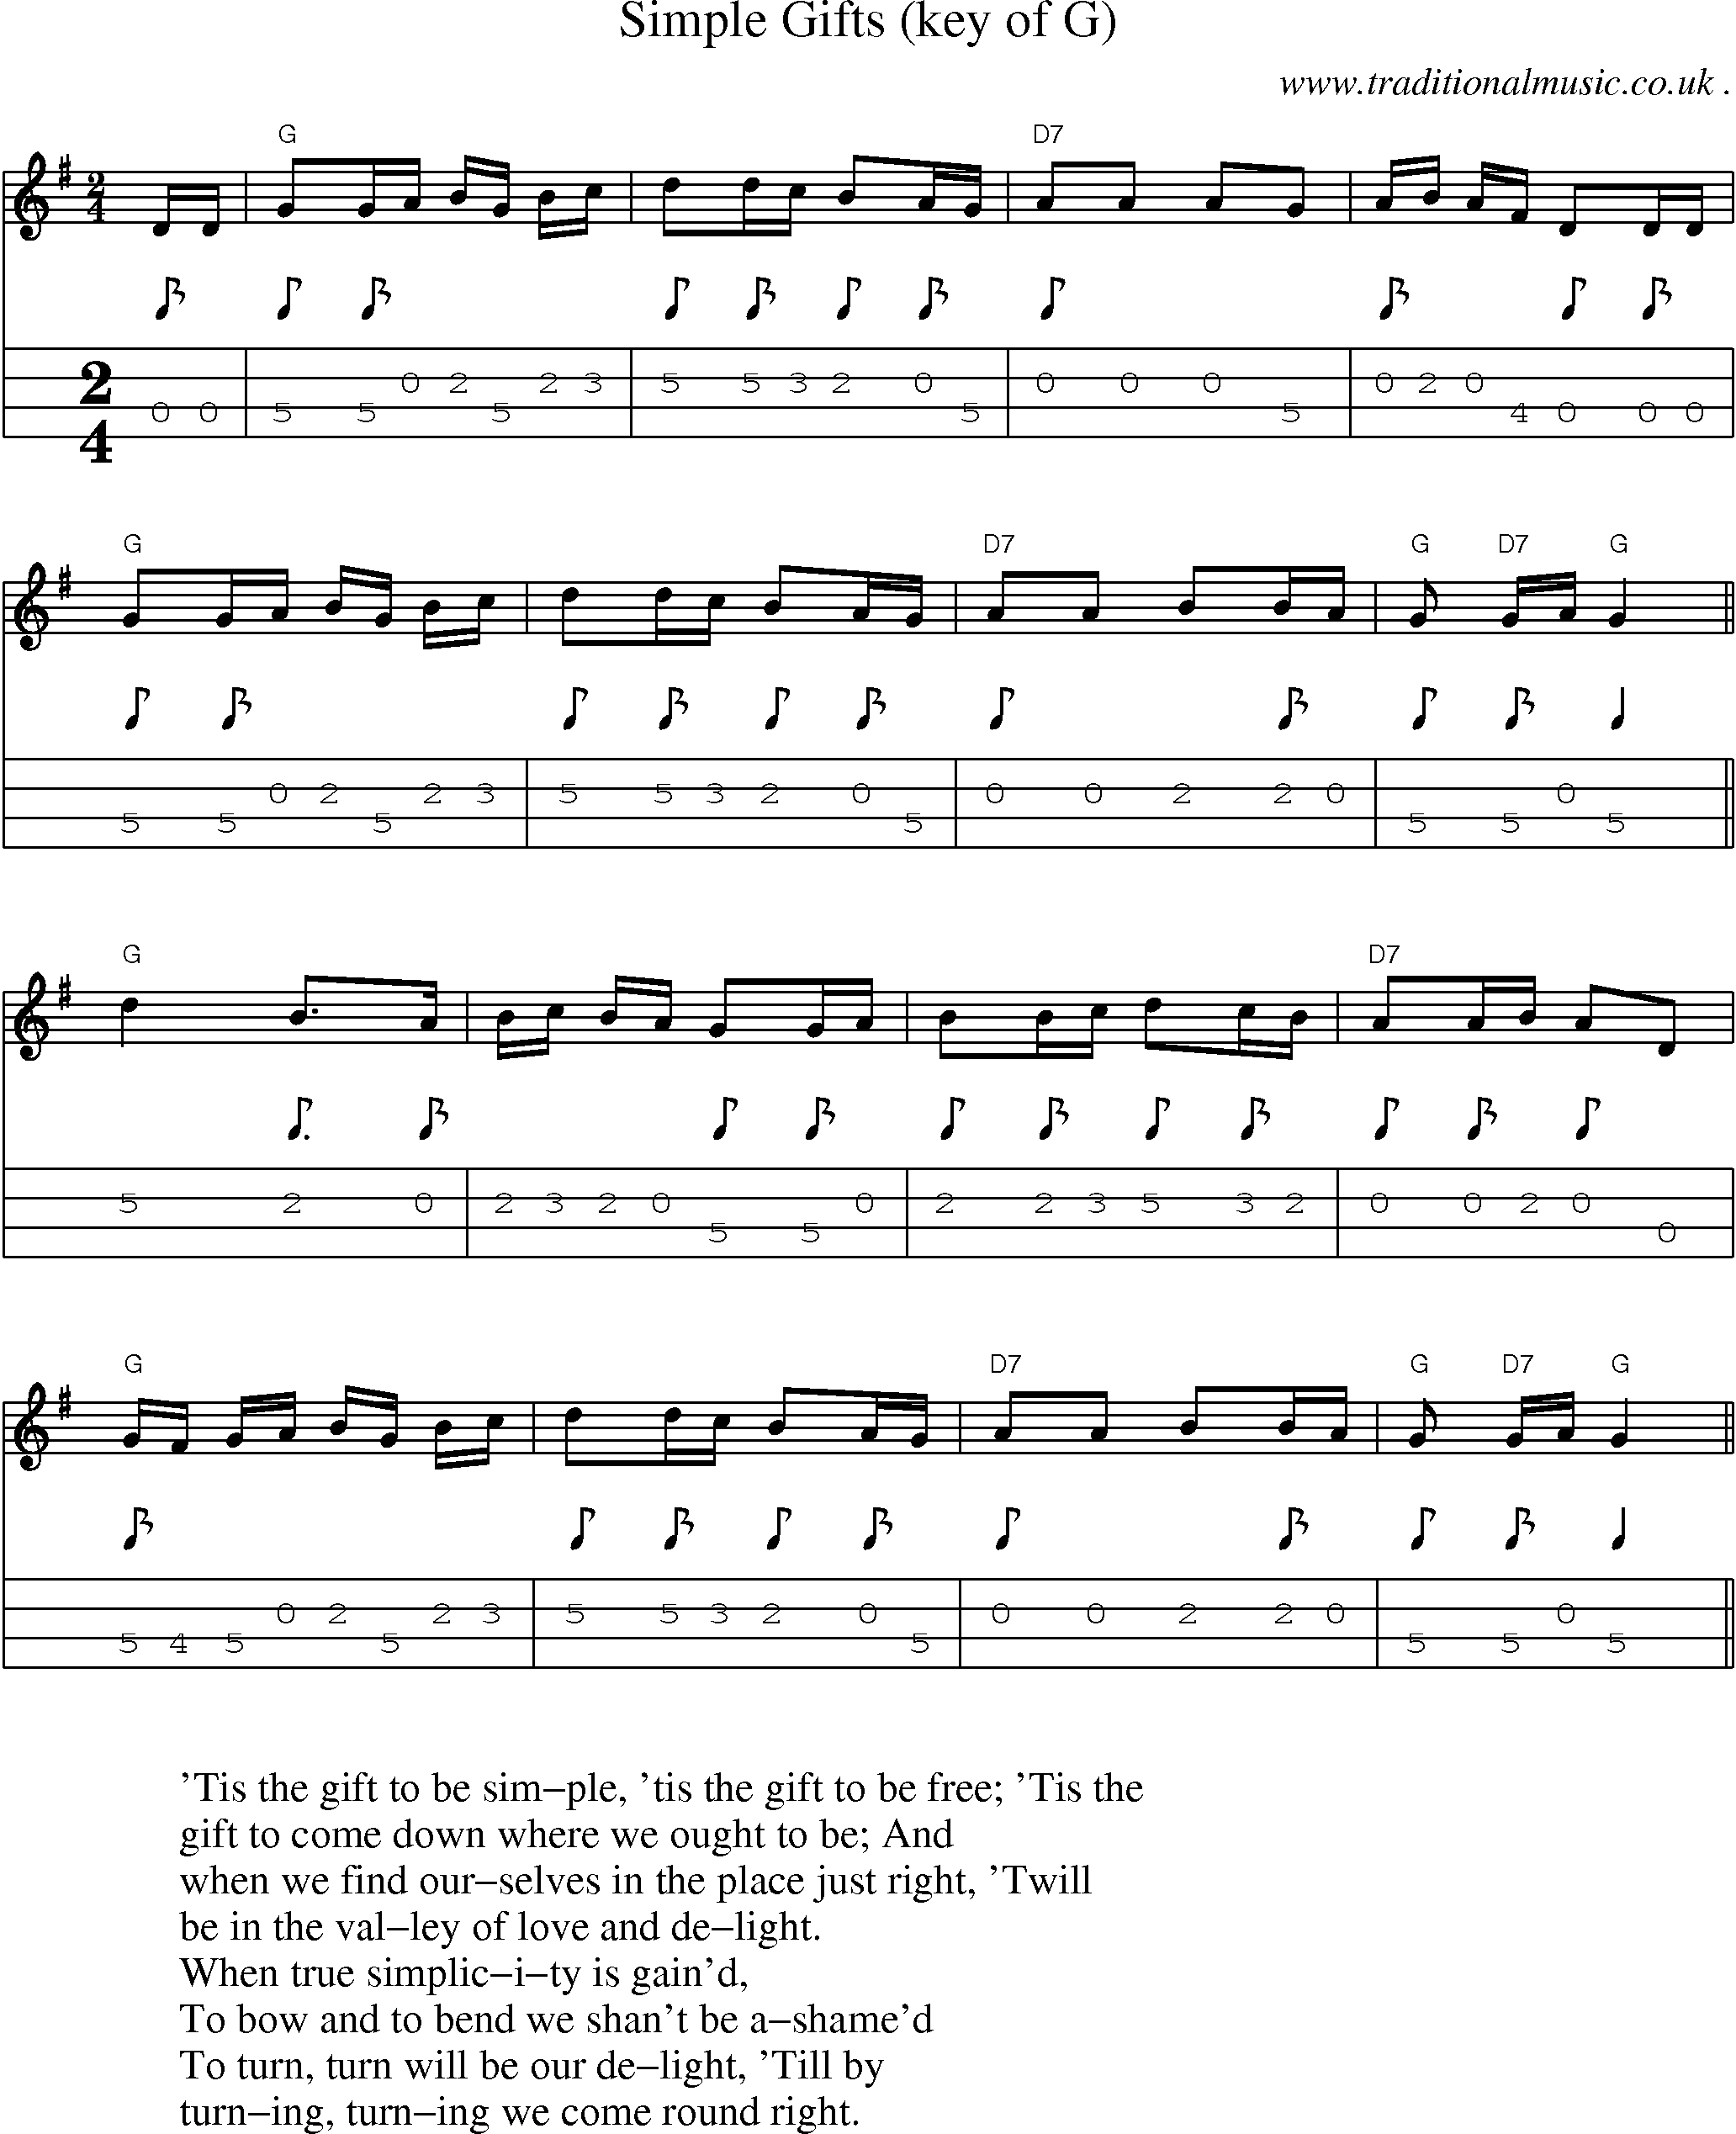 Music Score and Guitar Tabs for Simple Gifts (keyG)